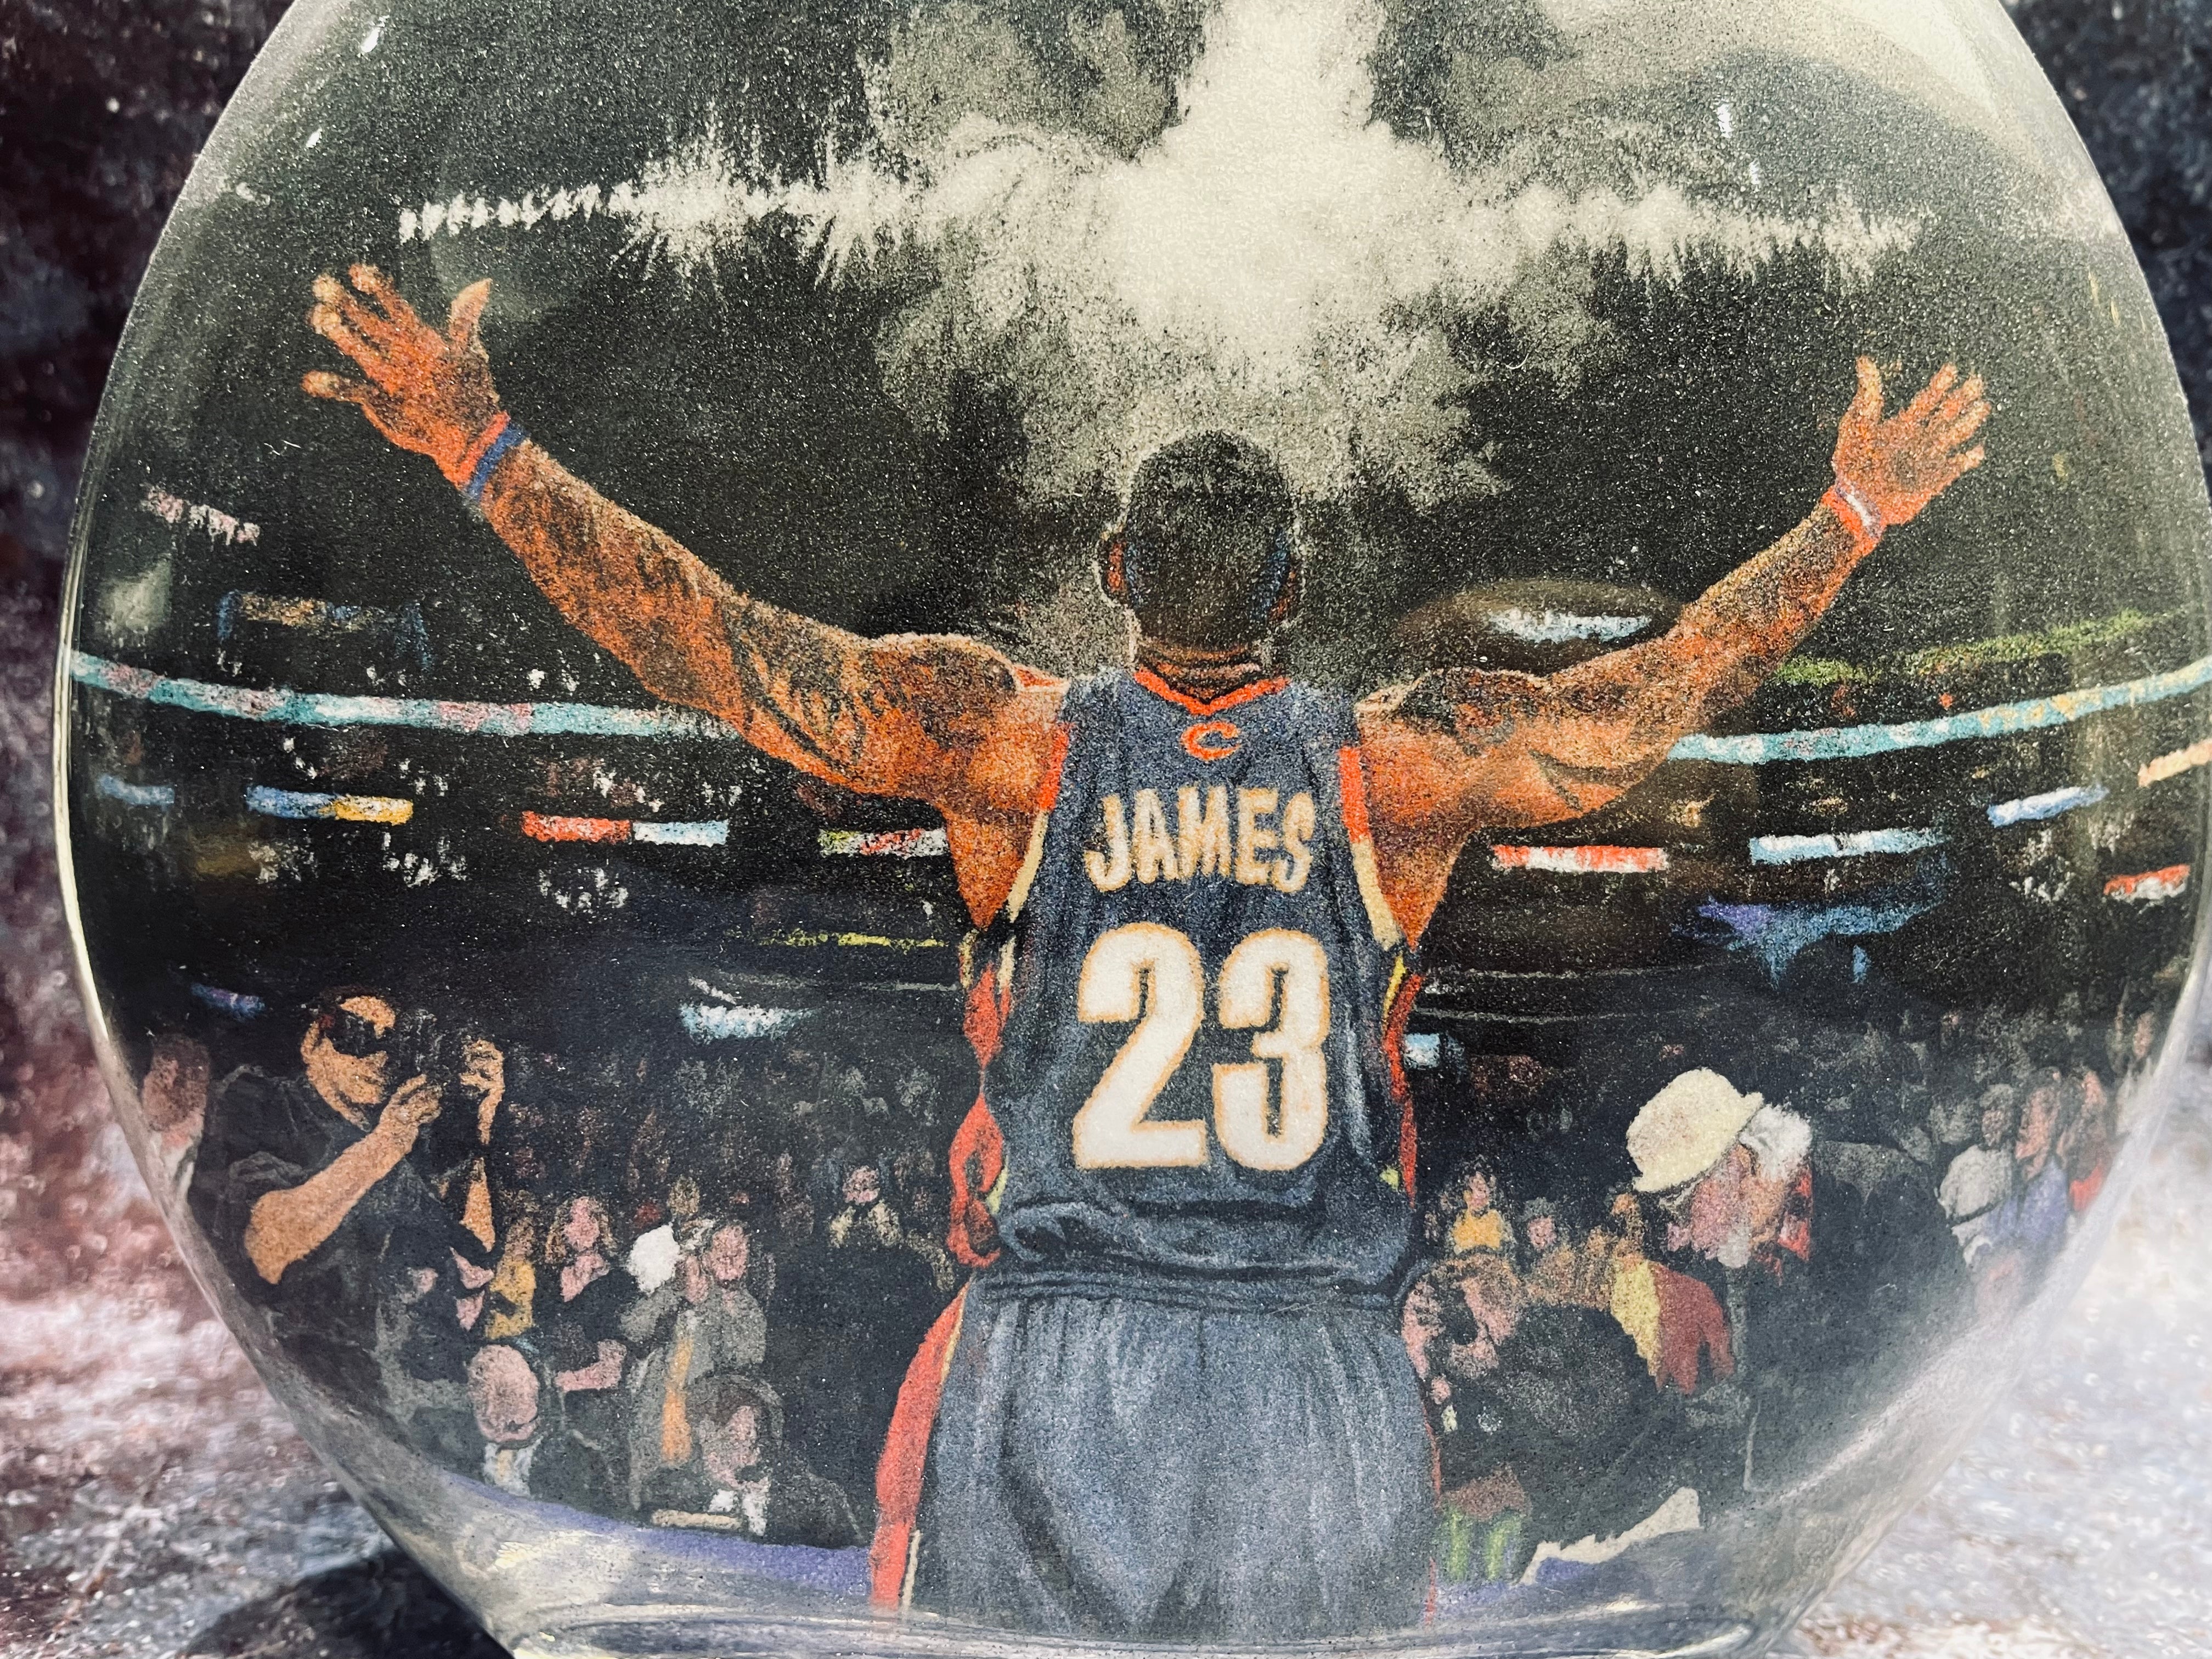 King James - Elevation of a Champion: The Jubilant Moment